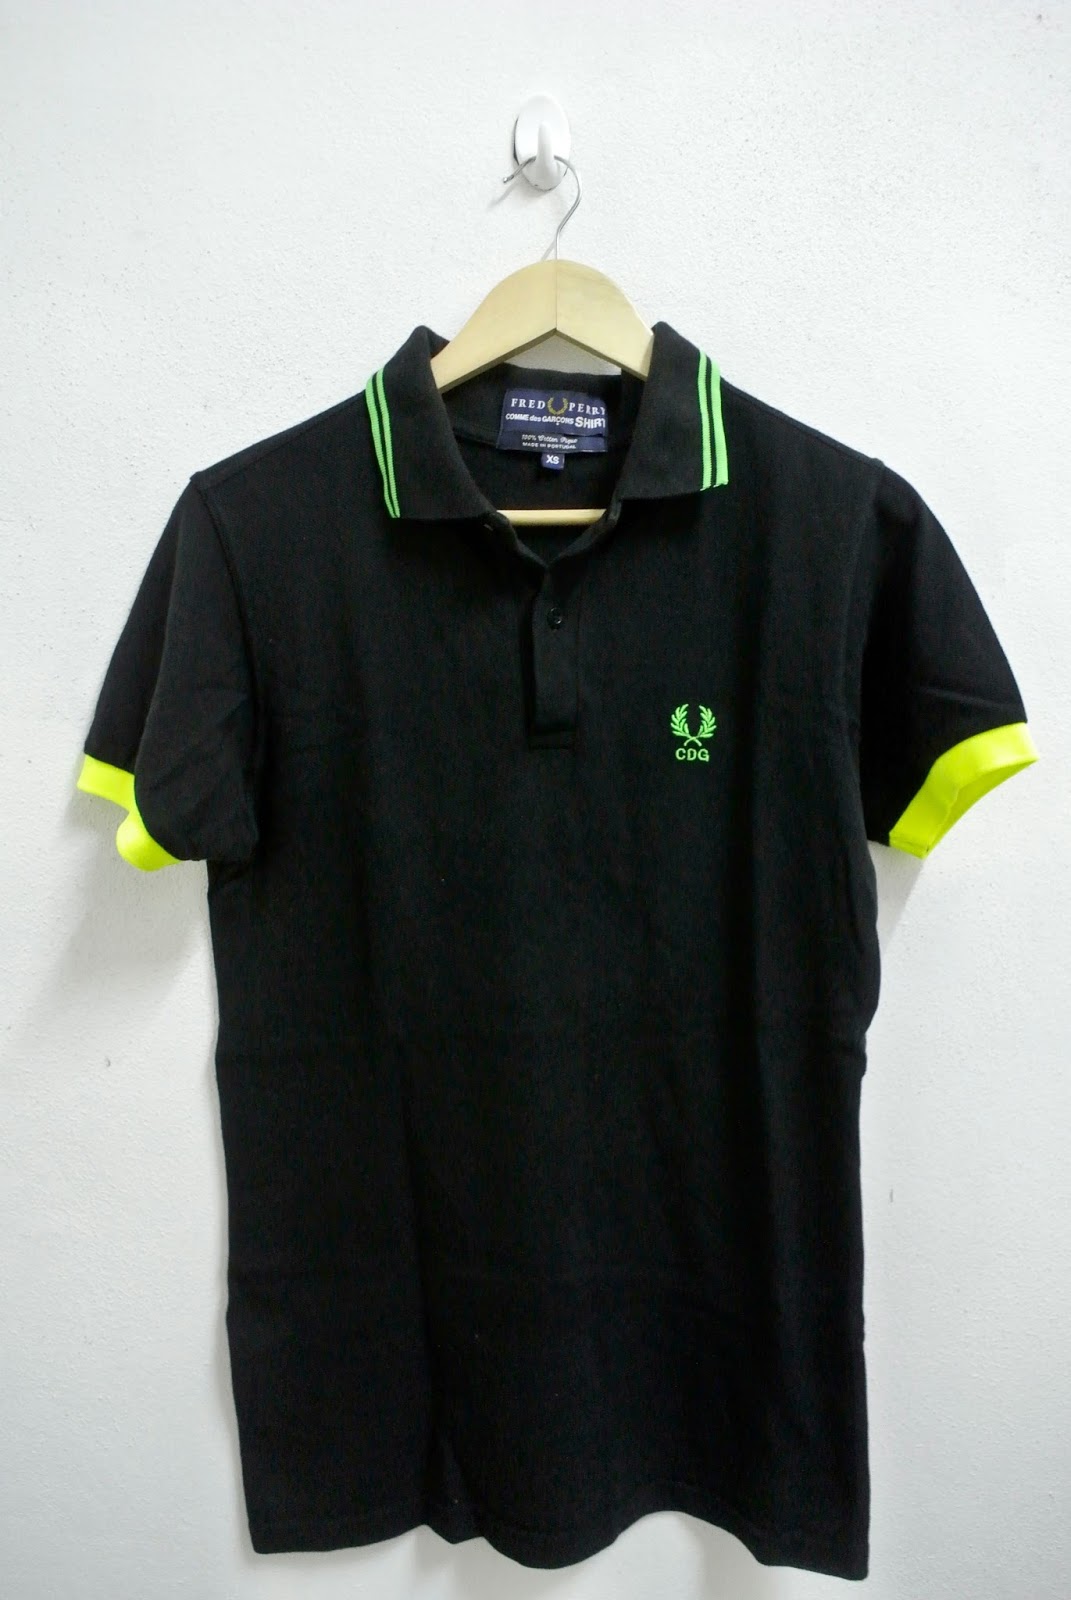 indieclothingitems: Fred Perry CDG Polo XS Shirt